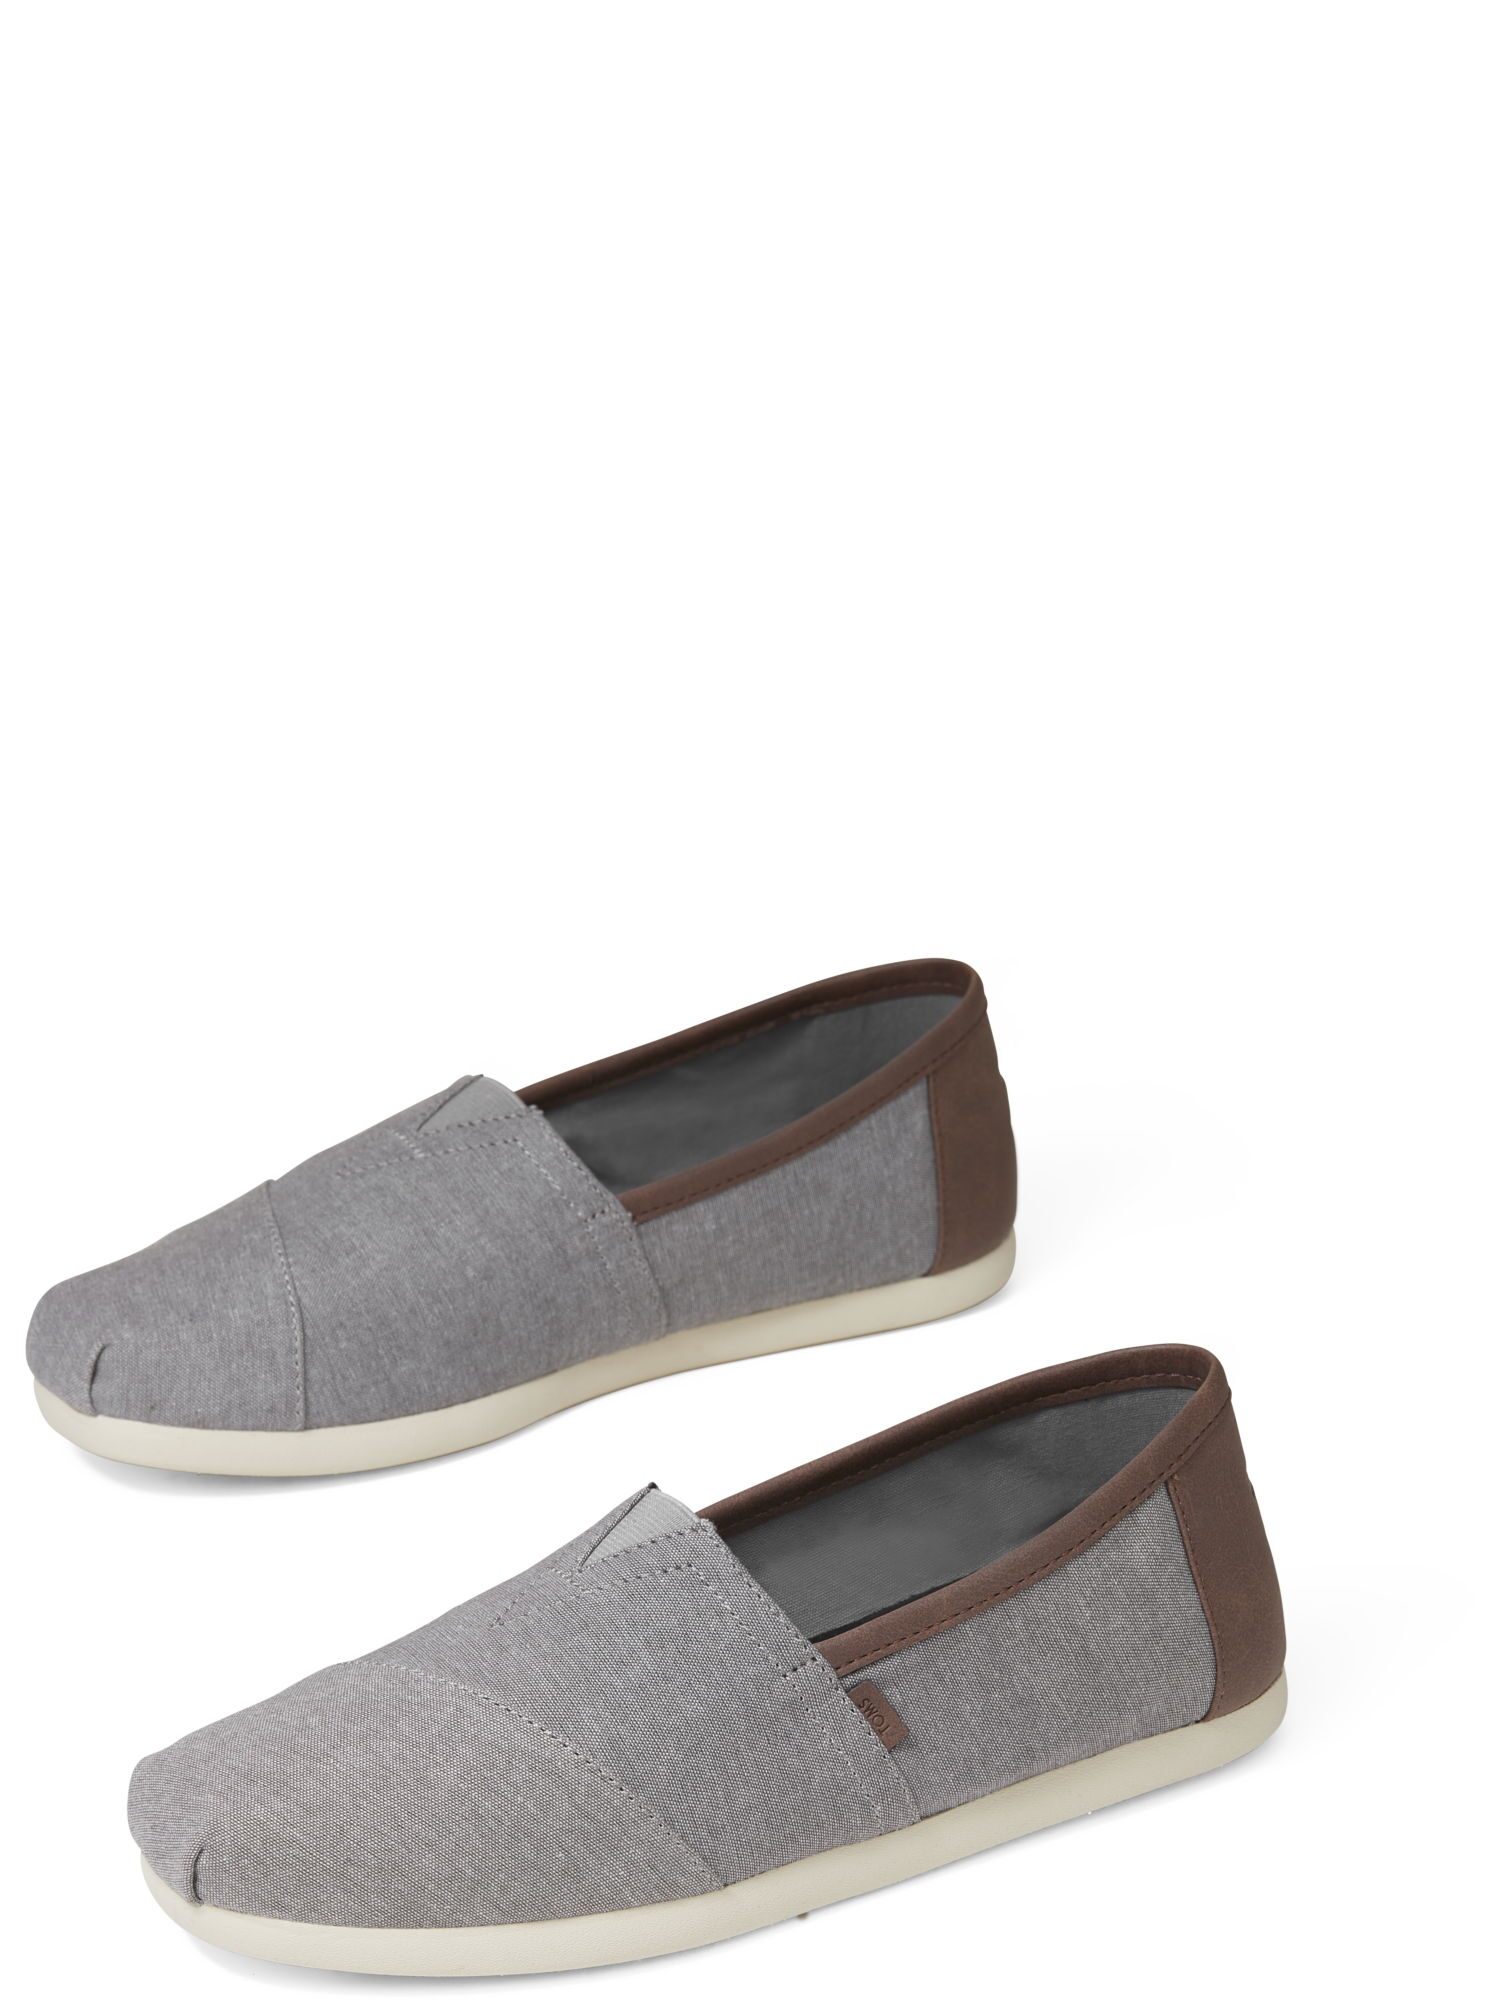 TOMS Men's Frost Chambray Classic Slip-On Shoes - image 1 of 2